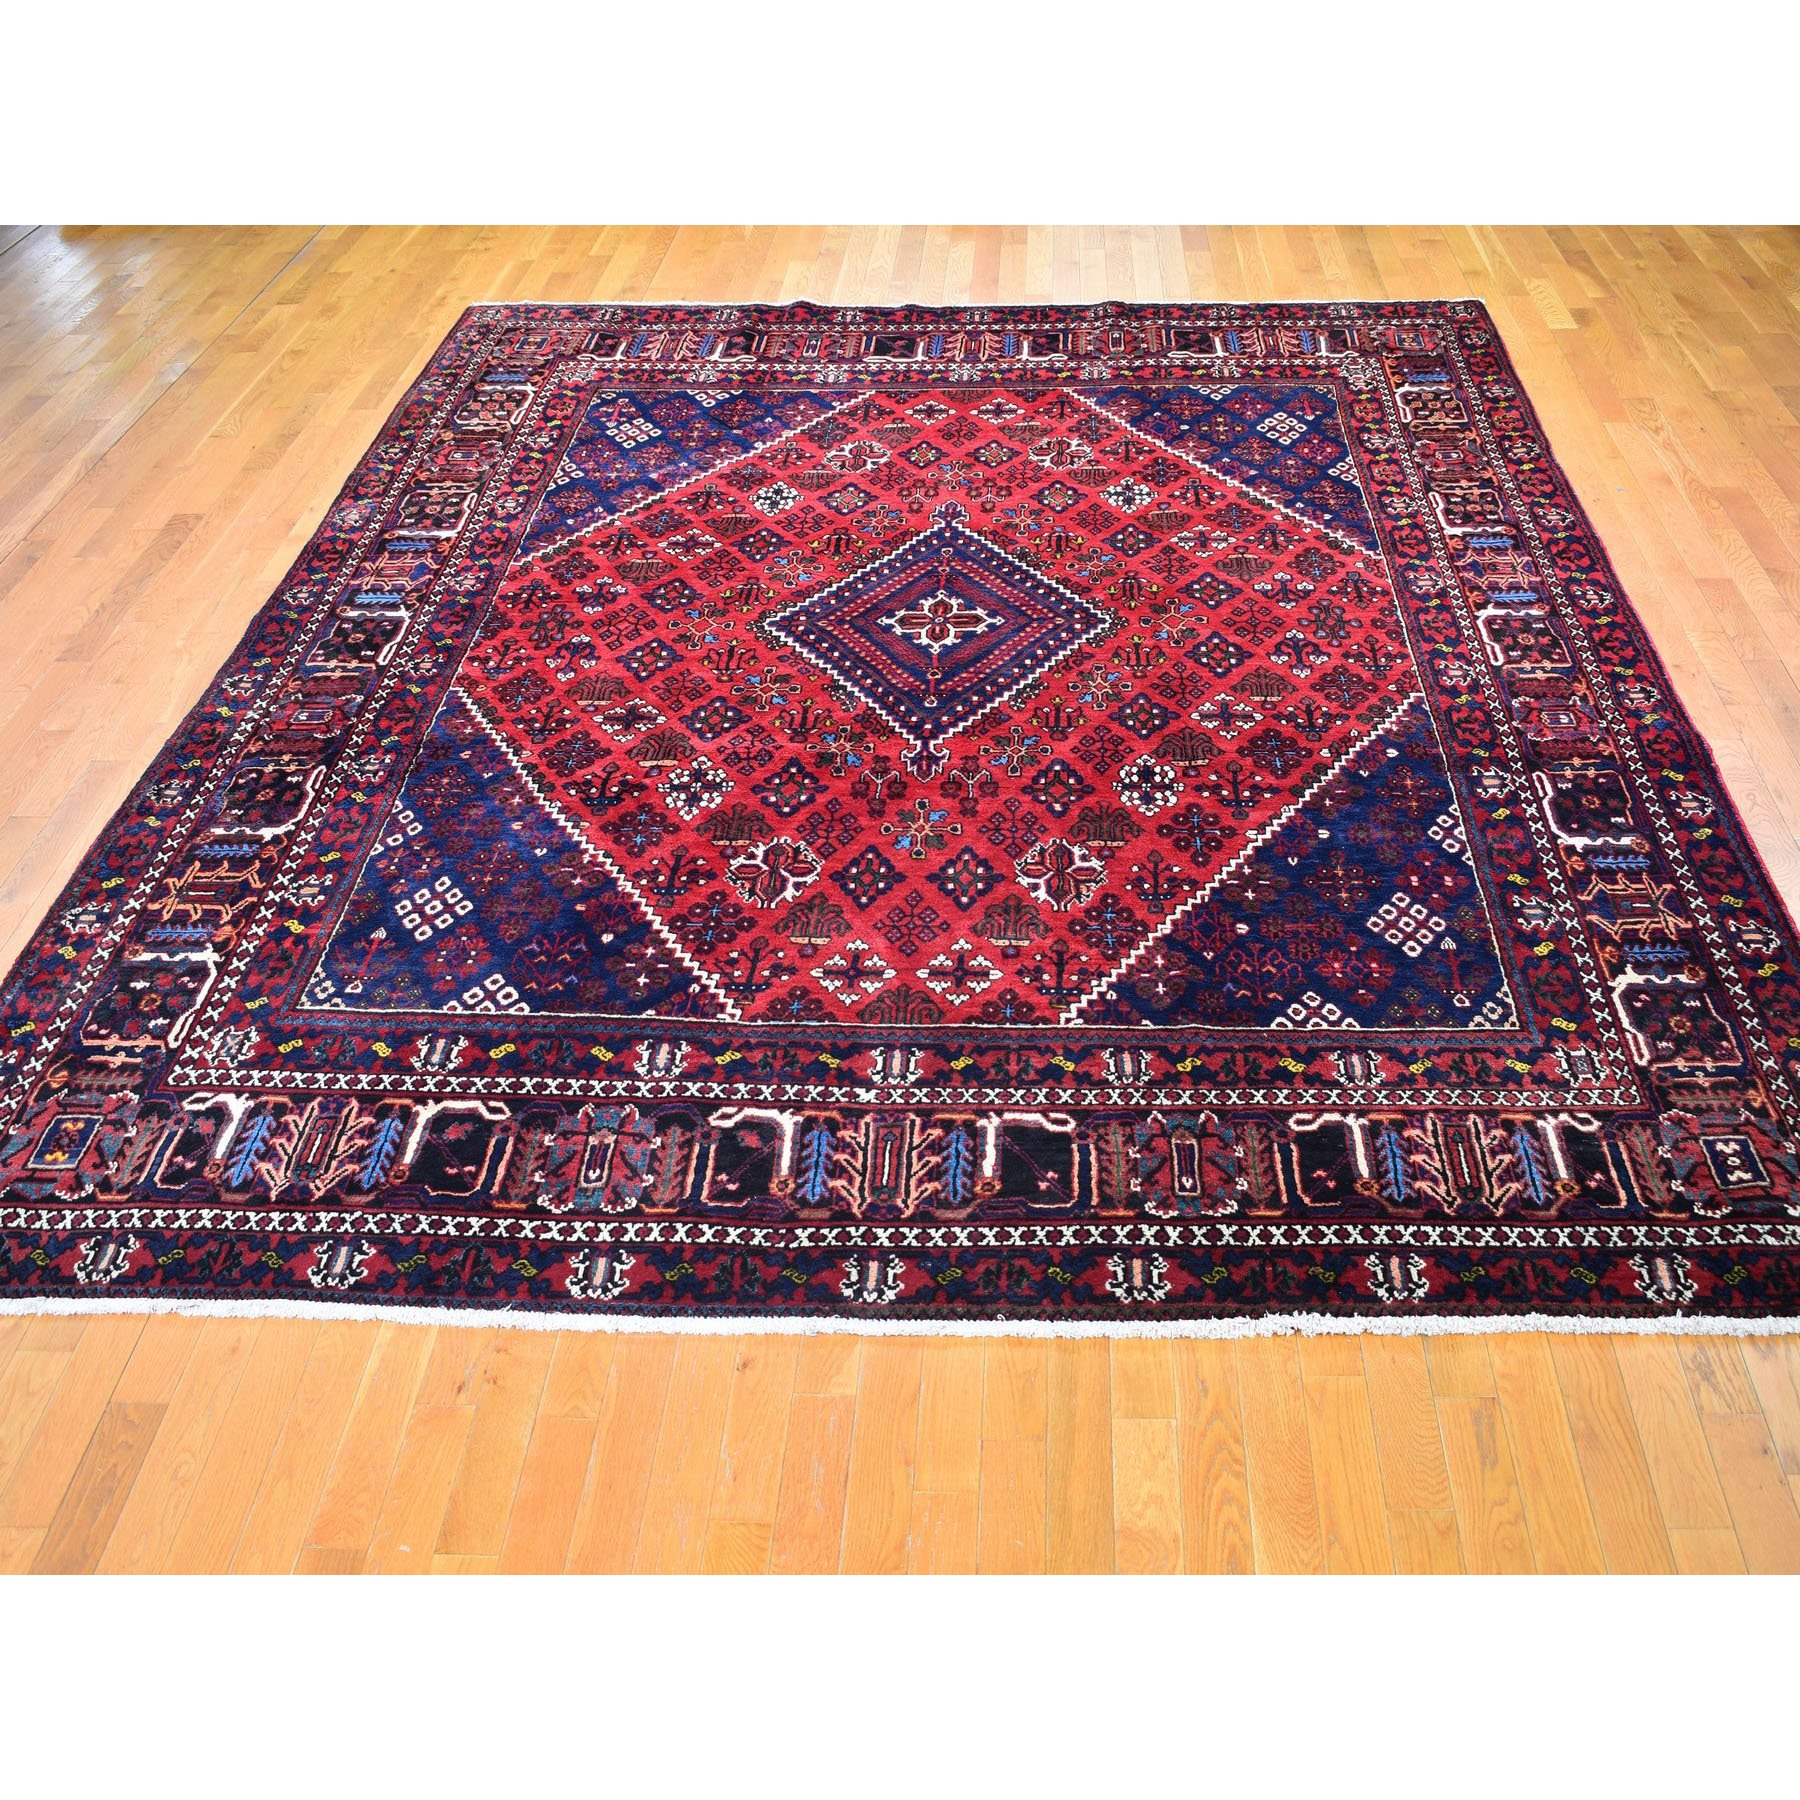 10-1 x12-8  Red Vintage Persian Joshagan Full Pile Exc Cond Clean Hand Knotted Oriental Rug 